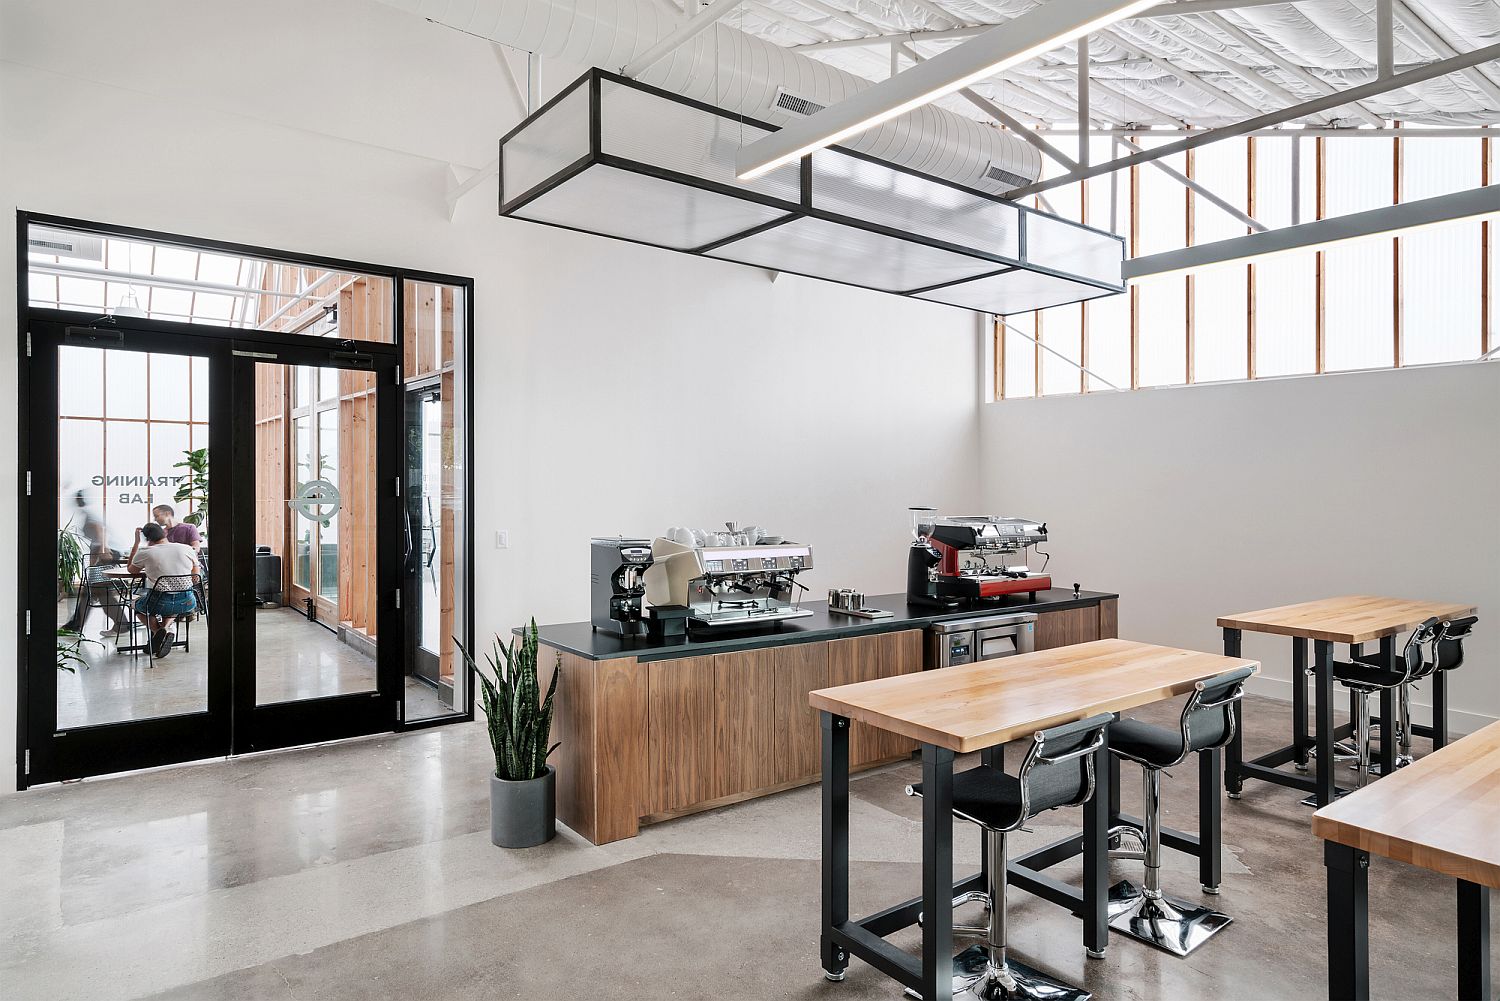 Look-inside-the-modern-cafe-and-roastery-converted-from-old-automobile-building